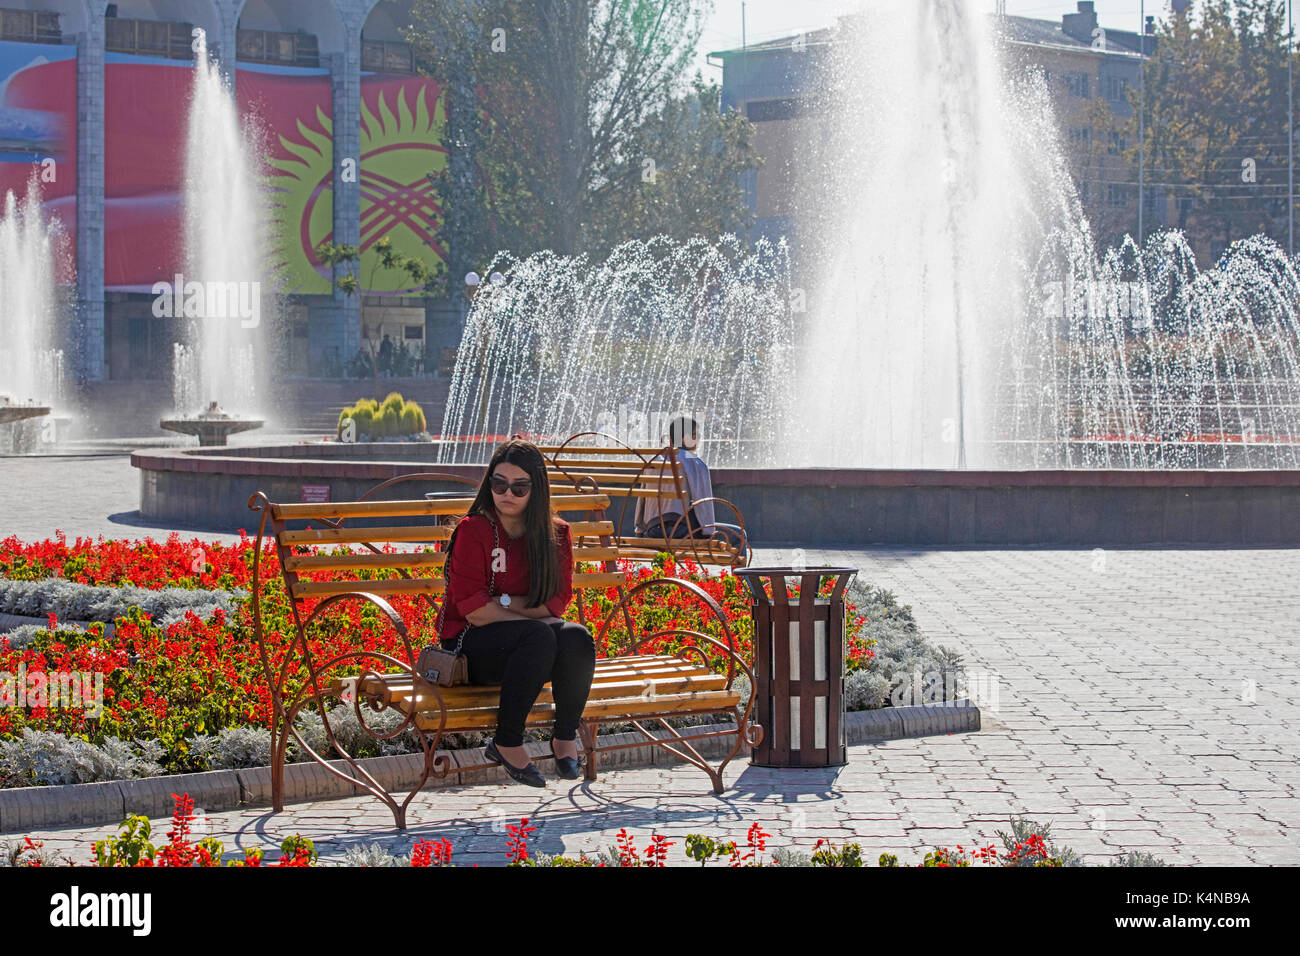 Fountain and Kyrgyz woman sitting in the Ala-Too Square in Bishkek, capital city of Kyrgyzstan Stock Photo